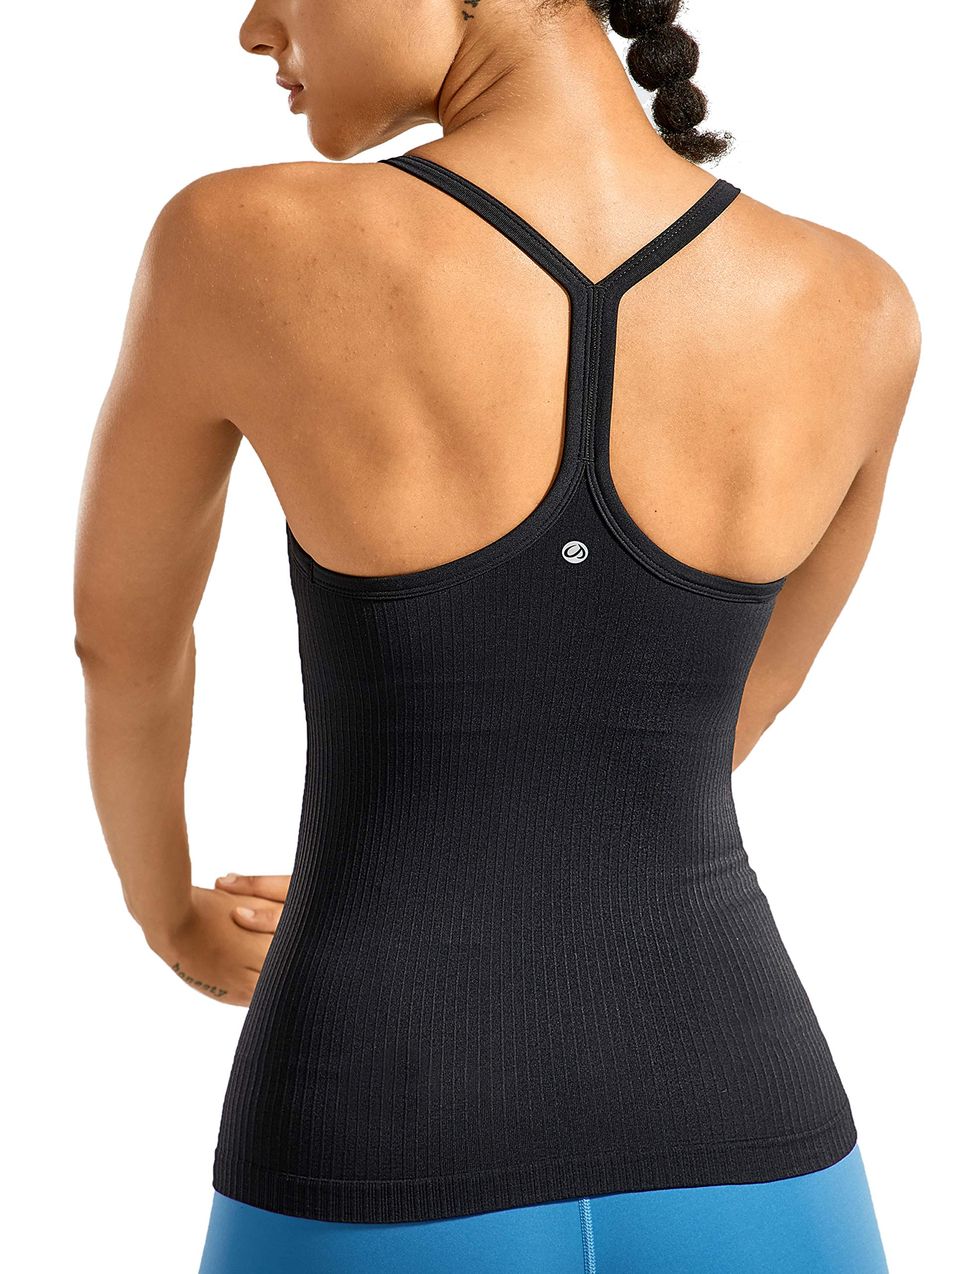 The Best Workout Tank Tops For Women